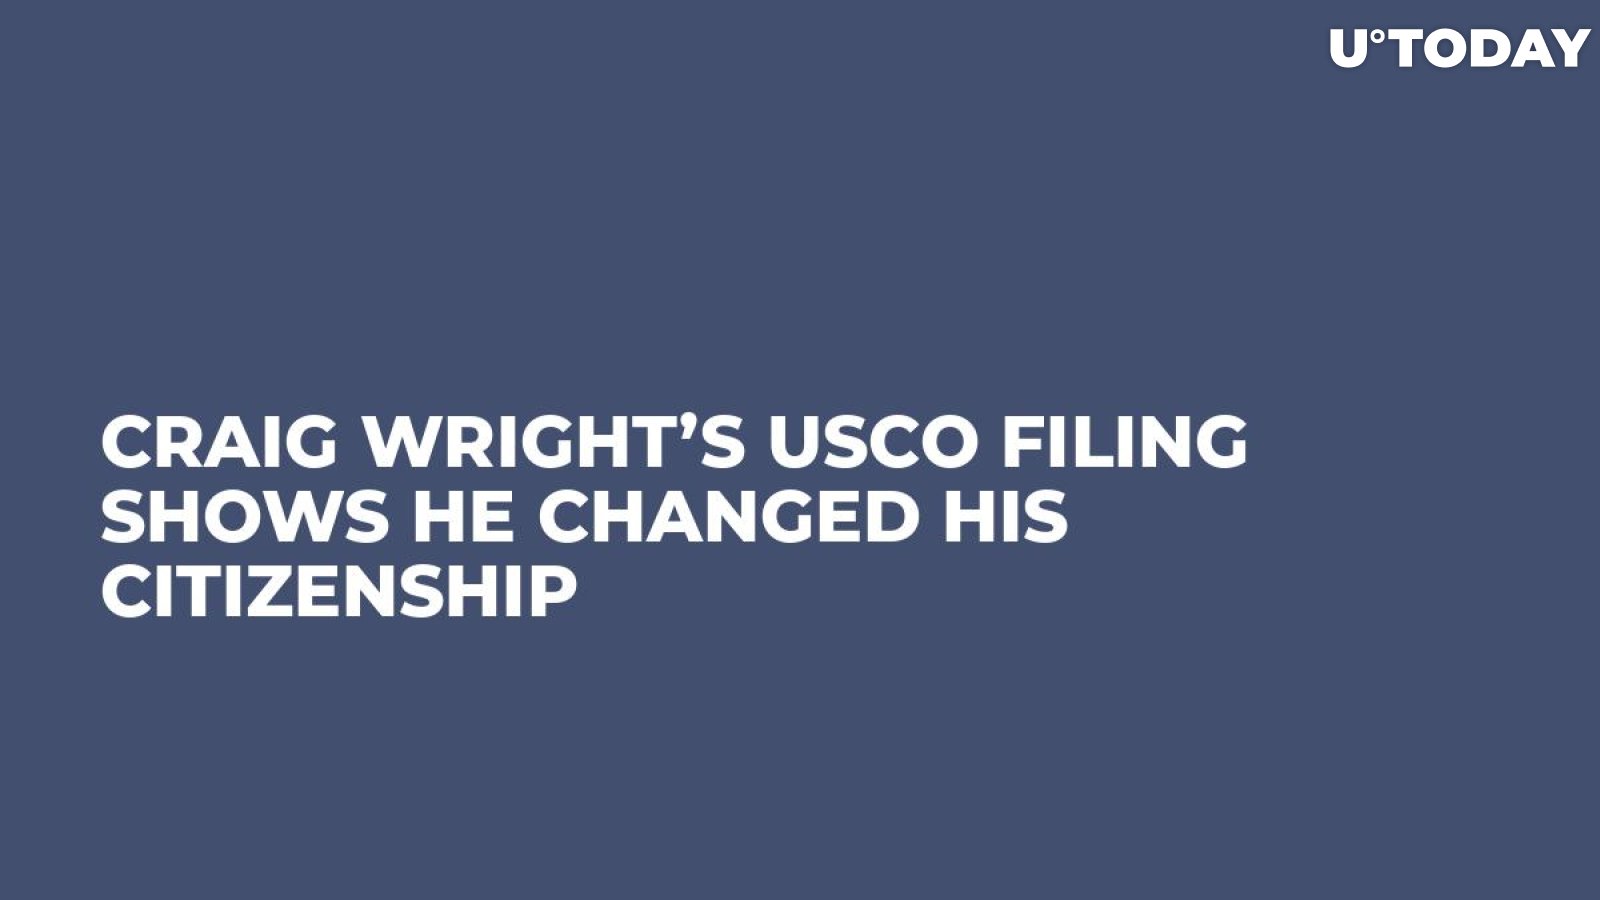 Craig Wright’s USCO Filing Shows He Changed His Citizenship